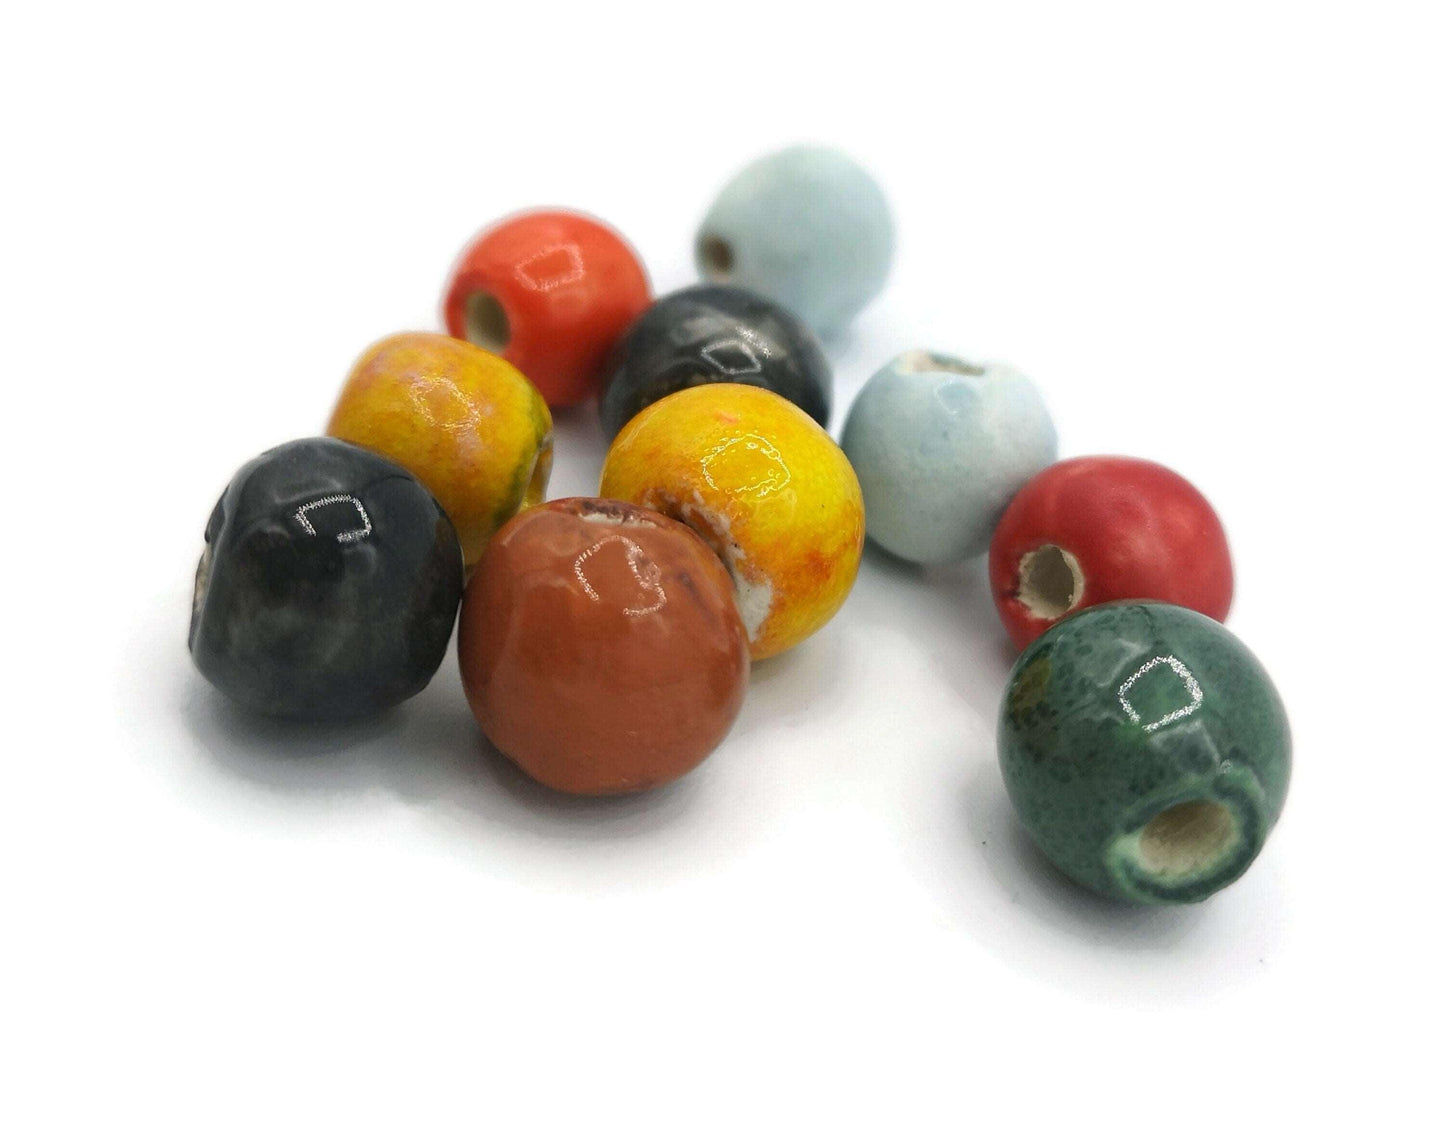 10Pc Round Assorted Beads Set, Handmade Ceramic Beads For Jewelry Making, Unique Artisan Clay Beads For Macrame Smooth And Durable Supplies